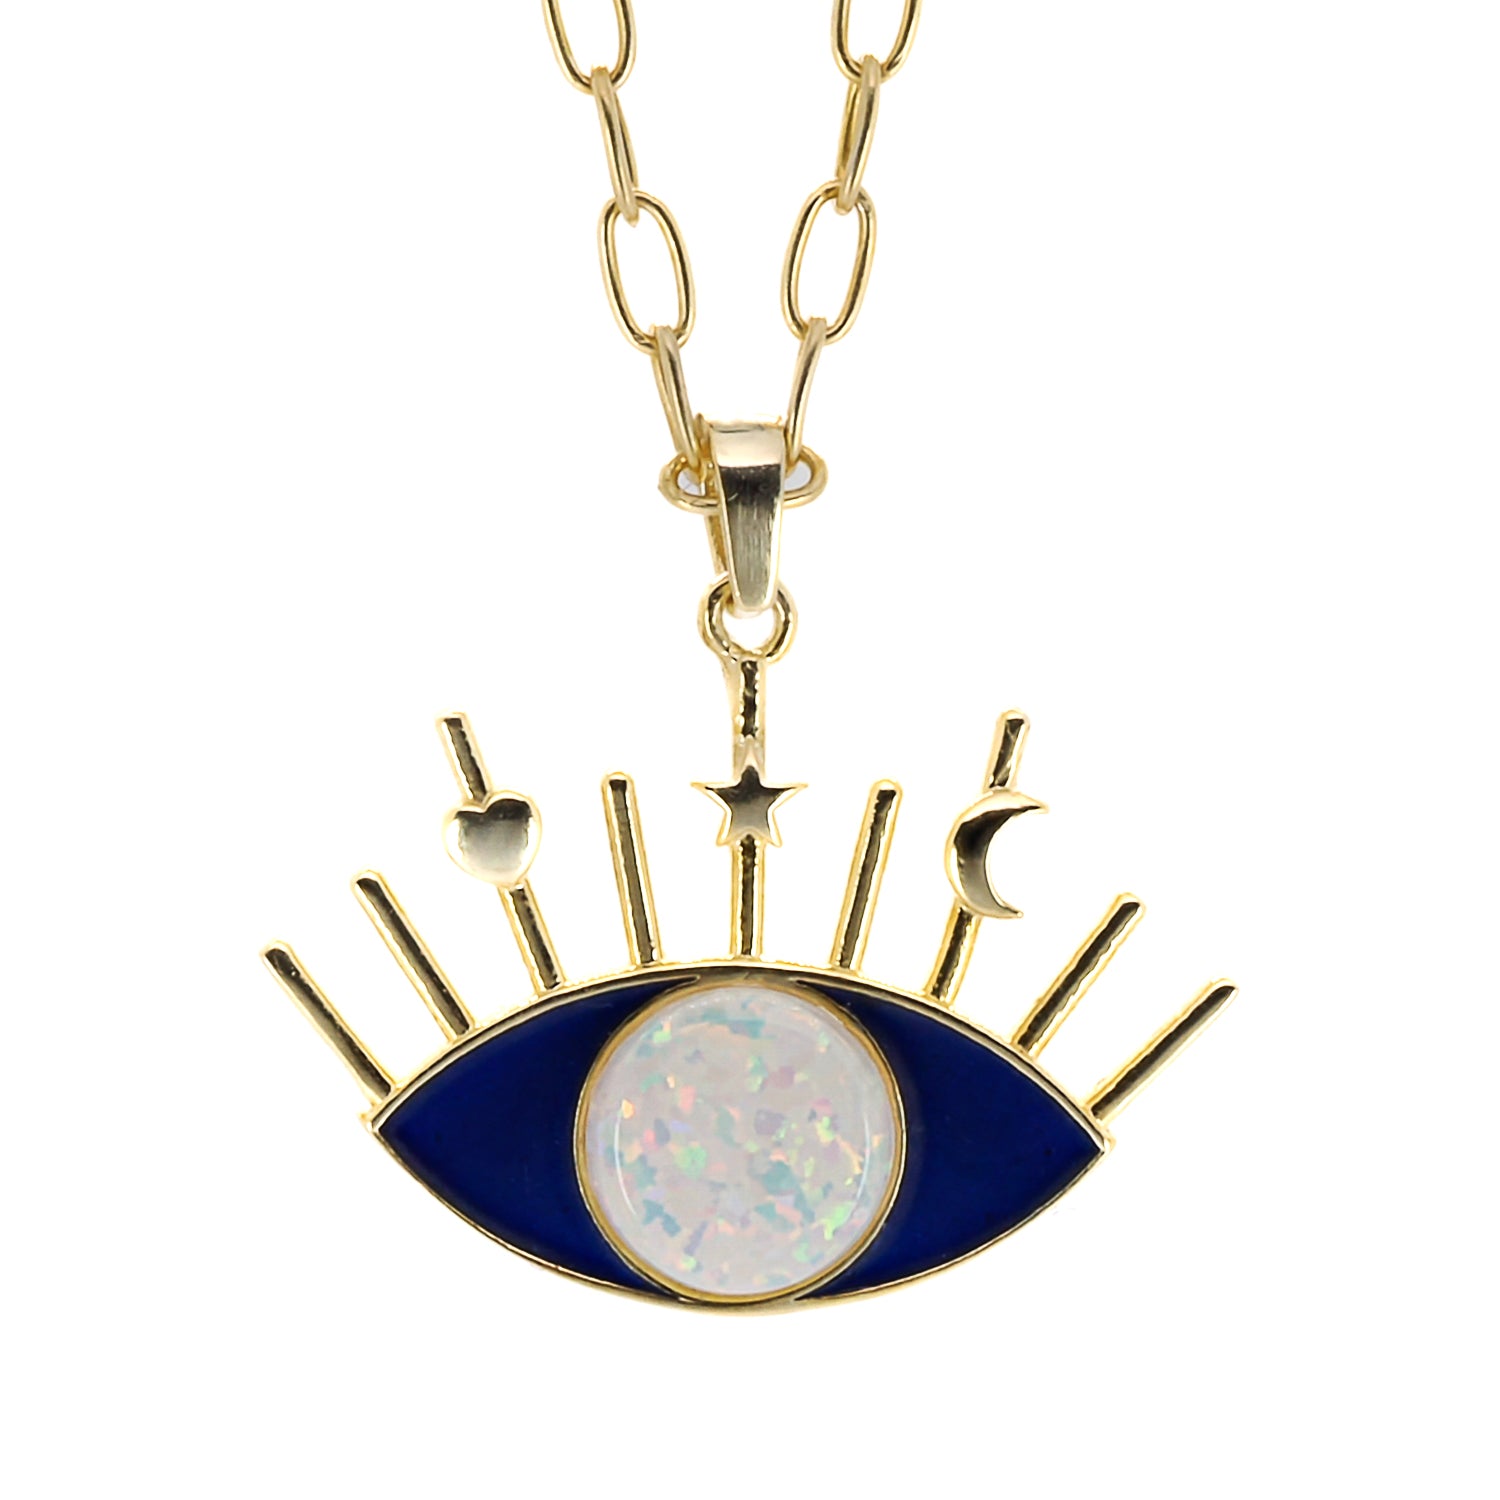 The adjustable sterling silver chain of the Opal Blue Evil Eye Necklace.